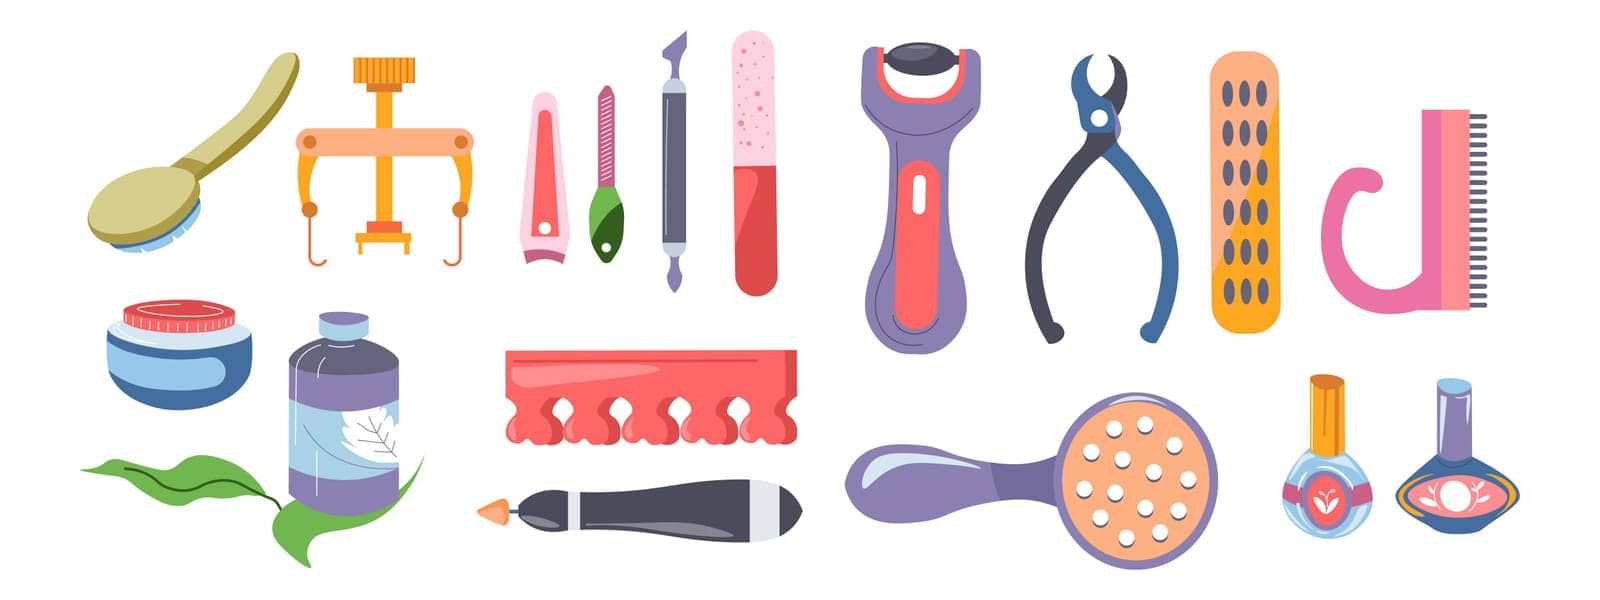 Pedicure and manicure salon kit and equipment, isolated tools, scissors and brushes, nail polish and dividers for toes. Fashion and makeup for women in spa, relax and rest. Vector in flat style